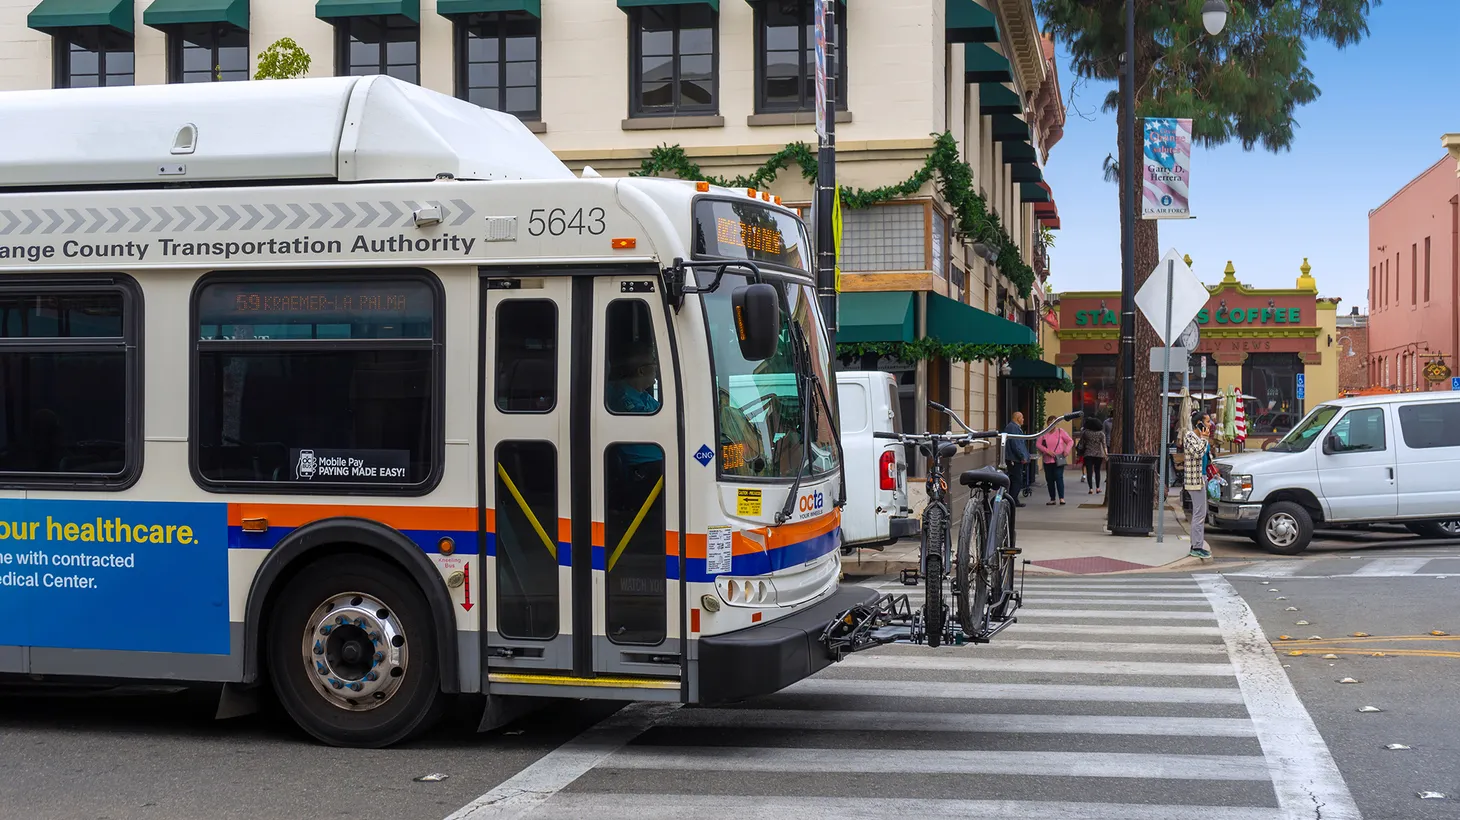 A city bus run by the Orange County Transit Authority is seen in Orange, California, November 14, 2019.